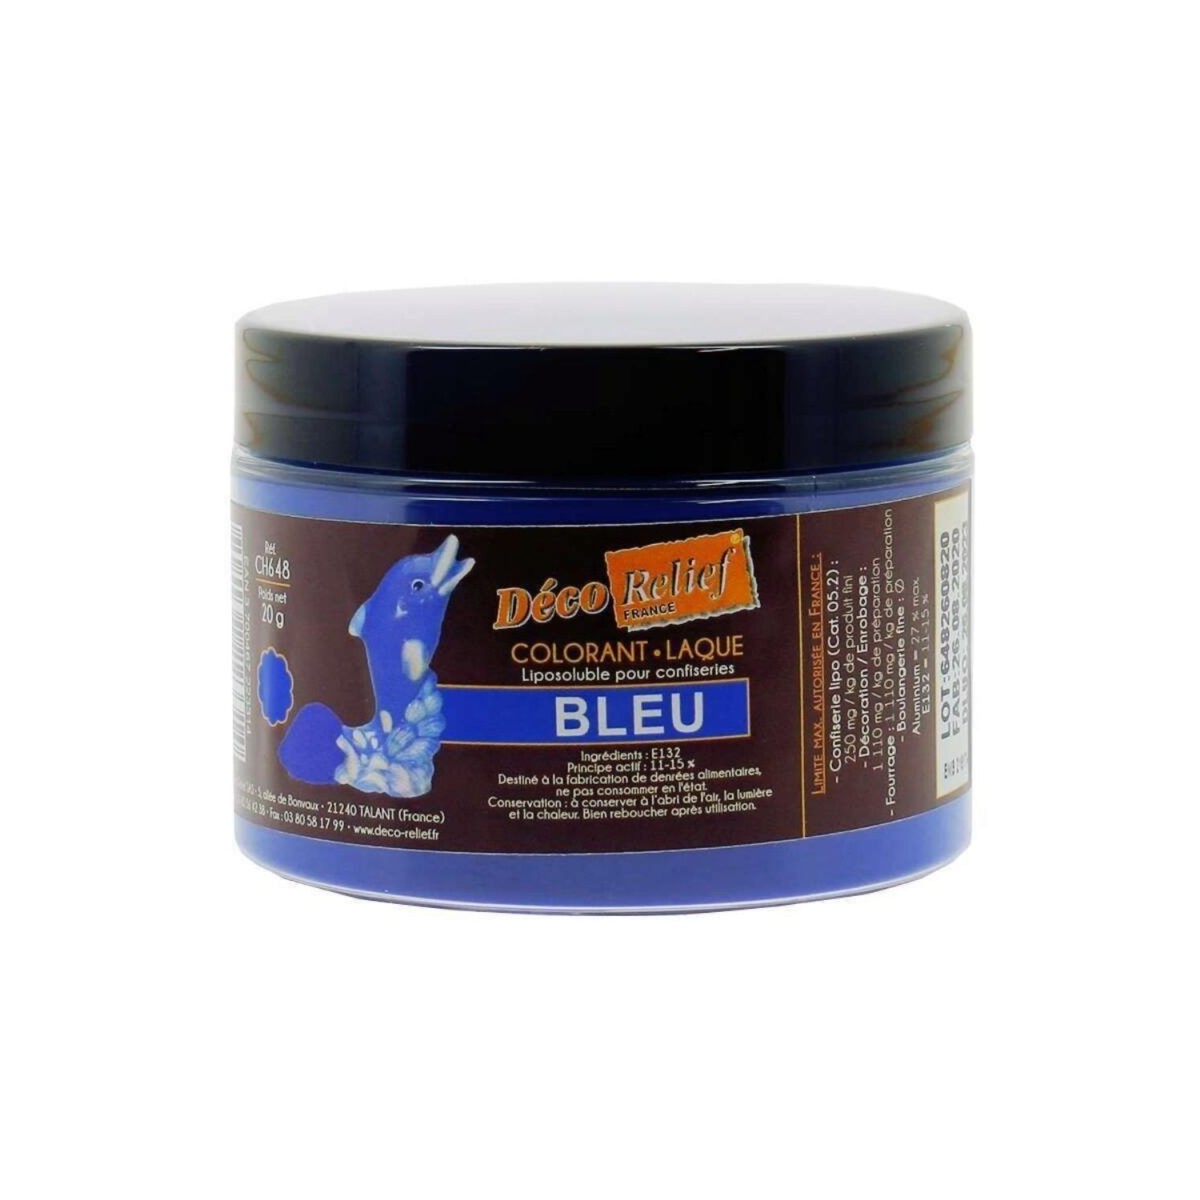 POWDERED LACQUER DYE FOR BLUE CHOCOLATE 20GR